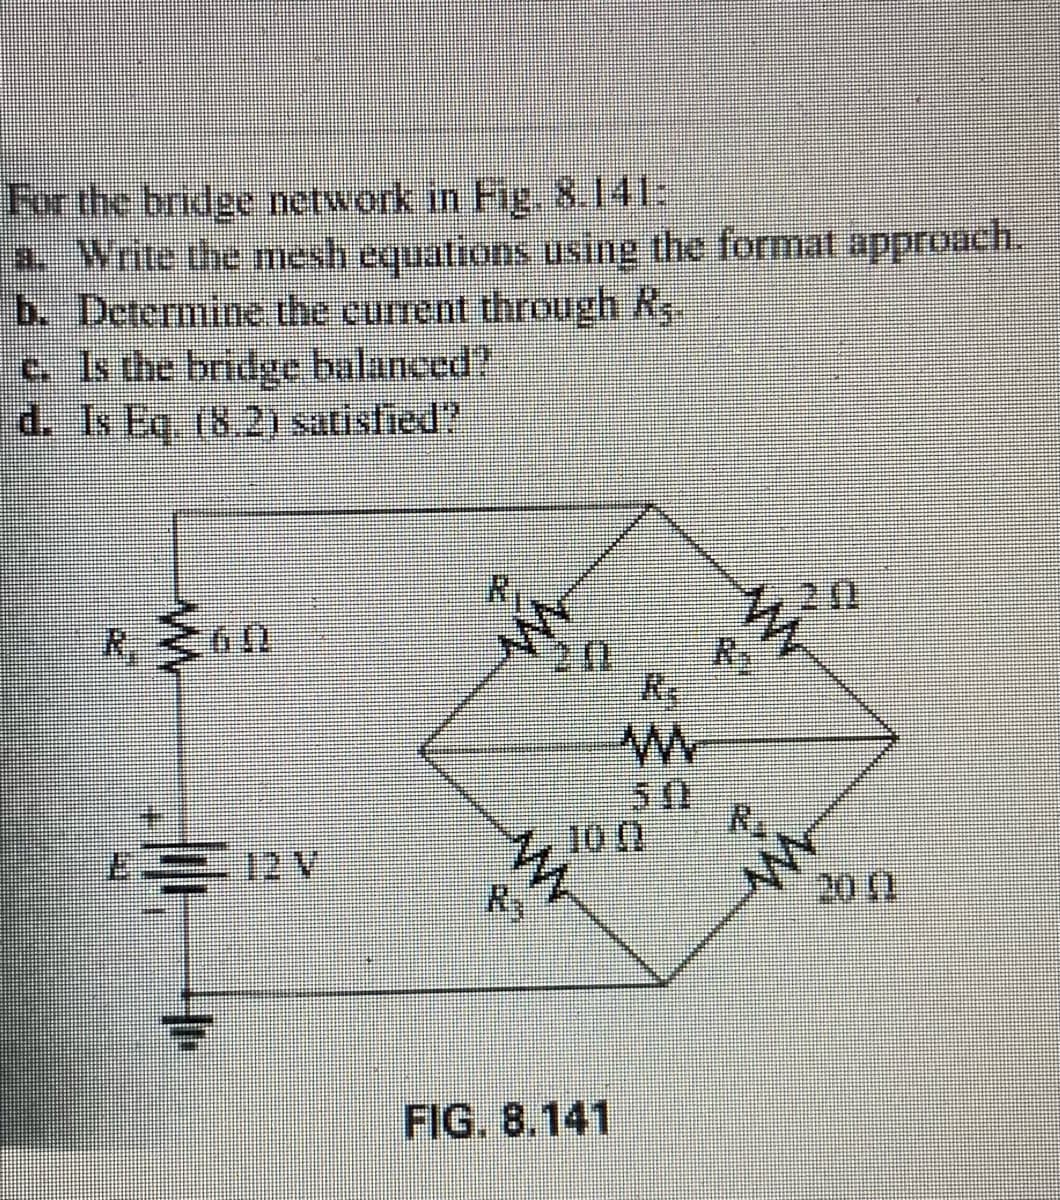 For the bridge network in Fig, 8.141:
a. Write the mesh equations using the format approach.
b. Determine the current through Rs
c. Is the bridge balanced?
d. Is Eq. (8.2) satisfied?
720
20
Re
7, 10 0
R3
20 1
FIG. 8.141
